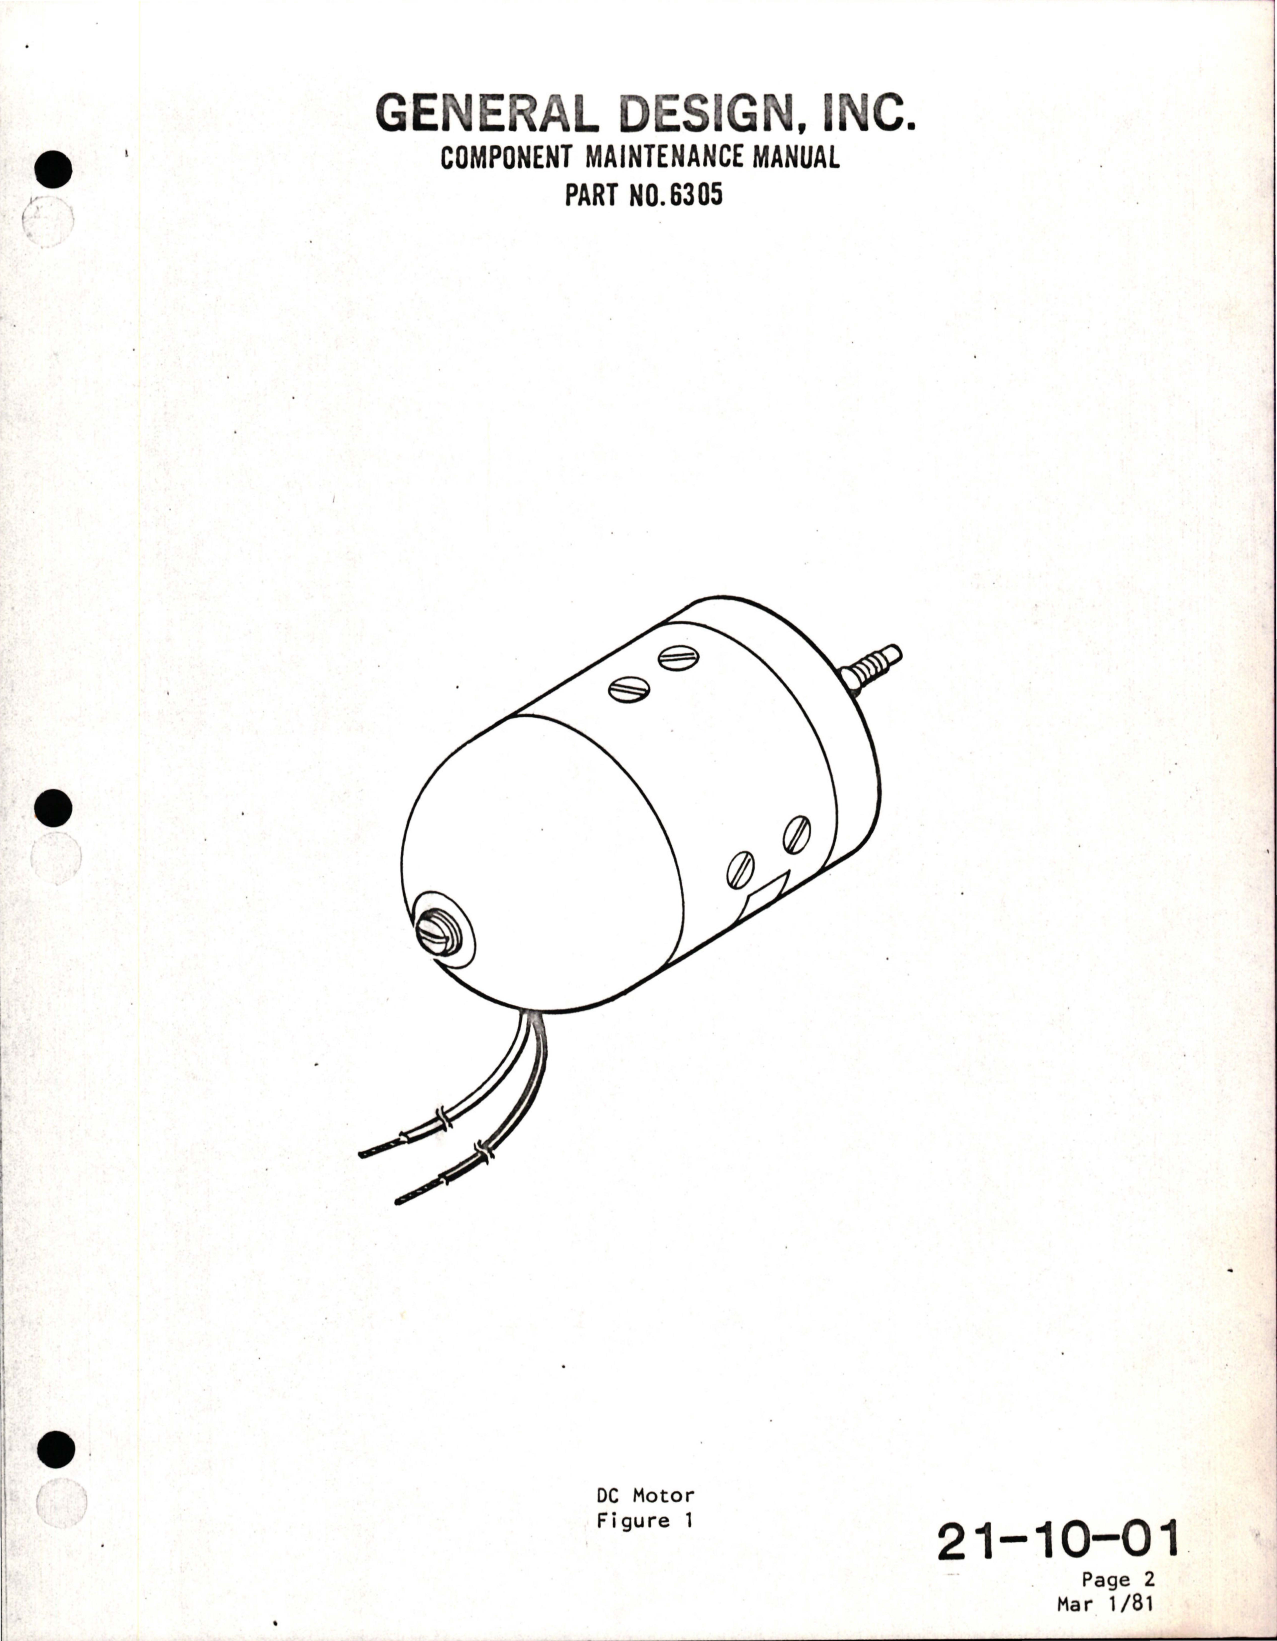 Sample page 7 from AirCorps Library document: Maintenance Manual with Illustrated Parts List for  DC Motor - Part 6305